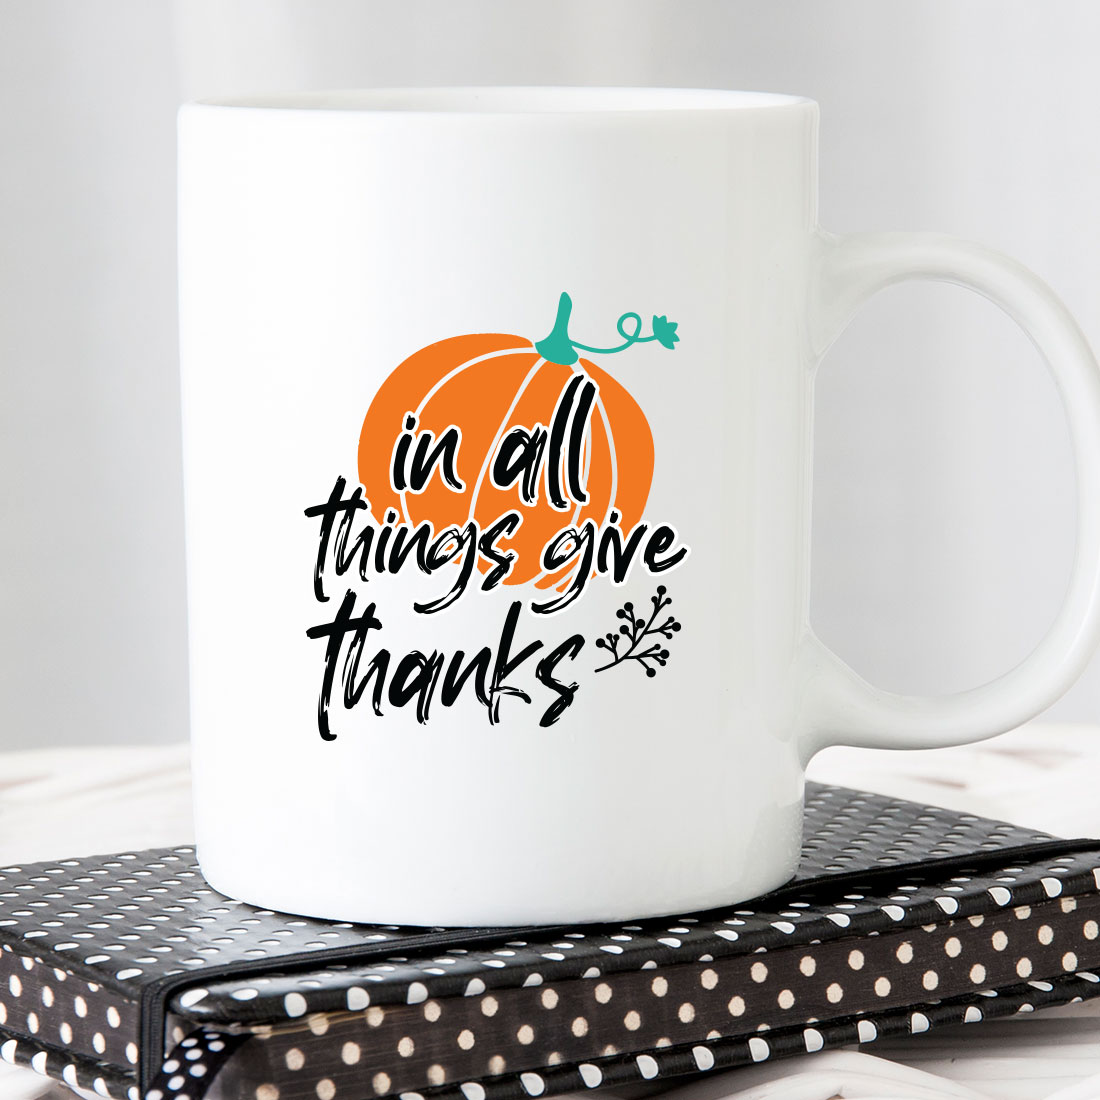 White coffee mug that says in all things give thanks.